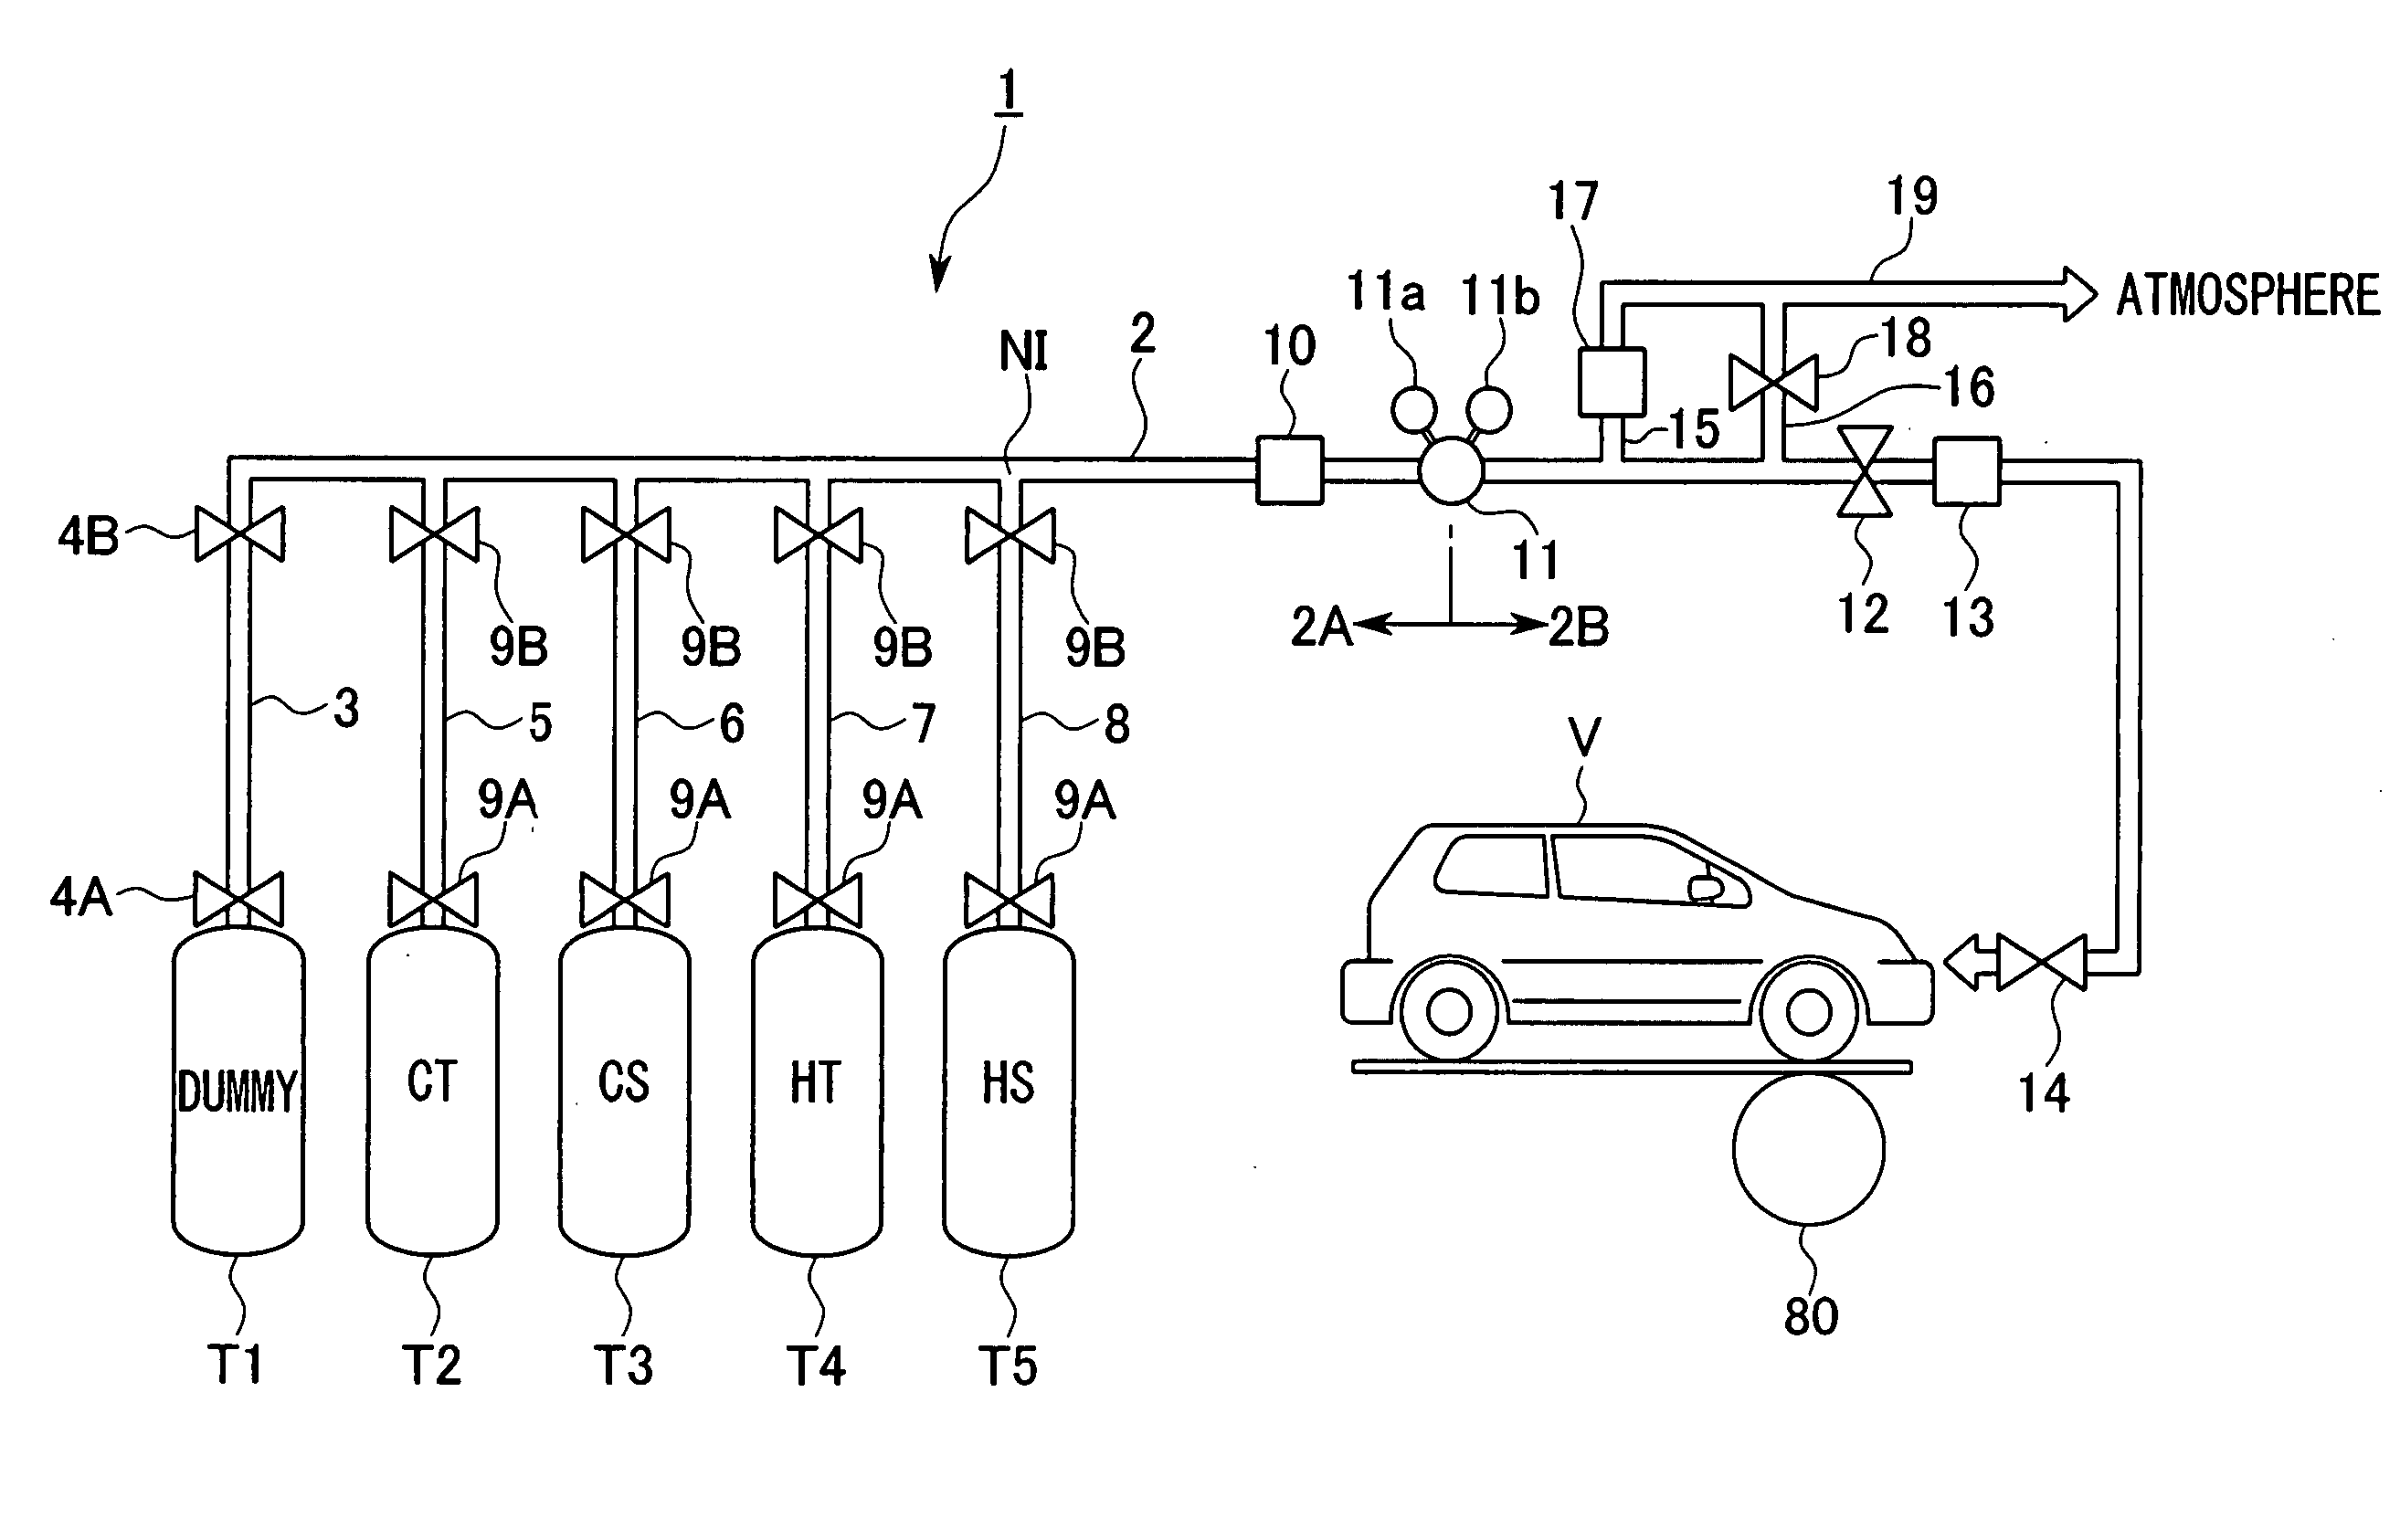 Hydrogen supply apparatus and hydrogen supply method for measuring fuel consumption of hydrogen fuel vehicle